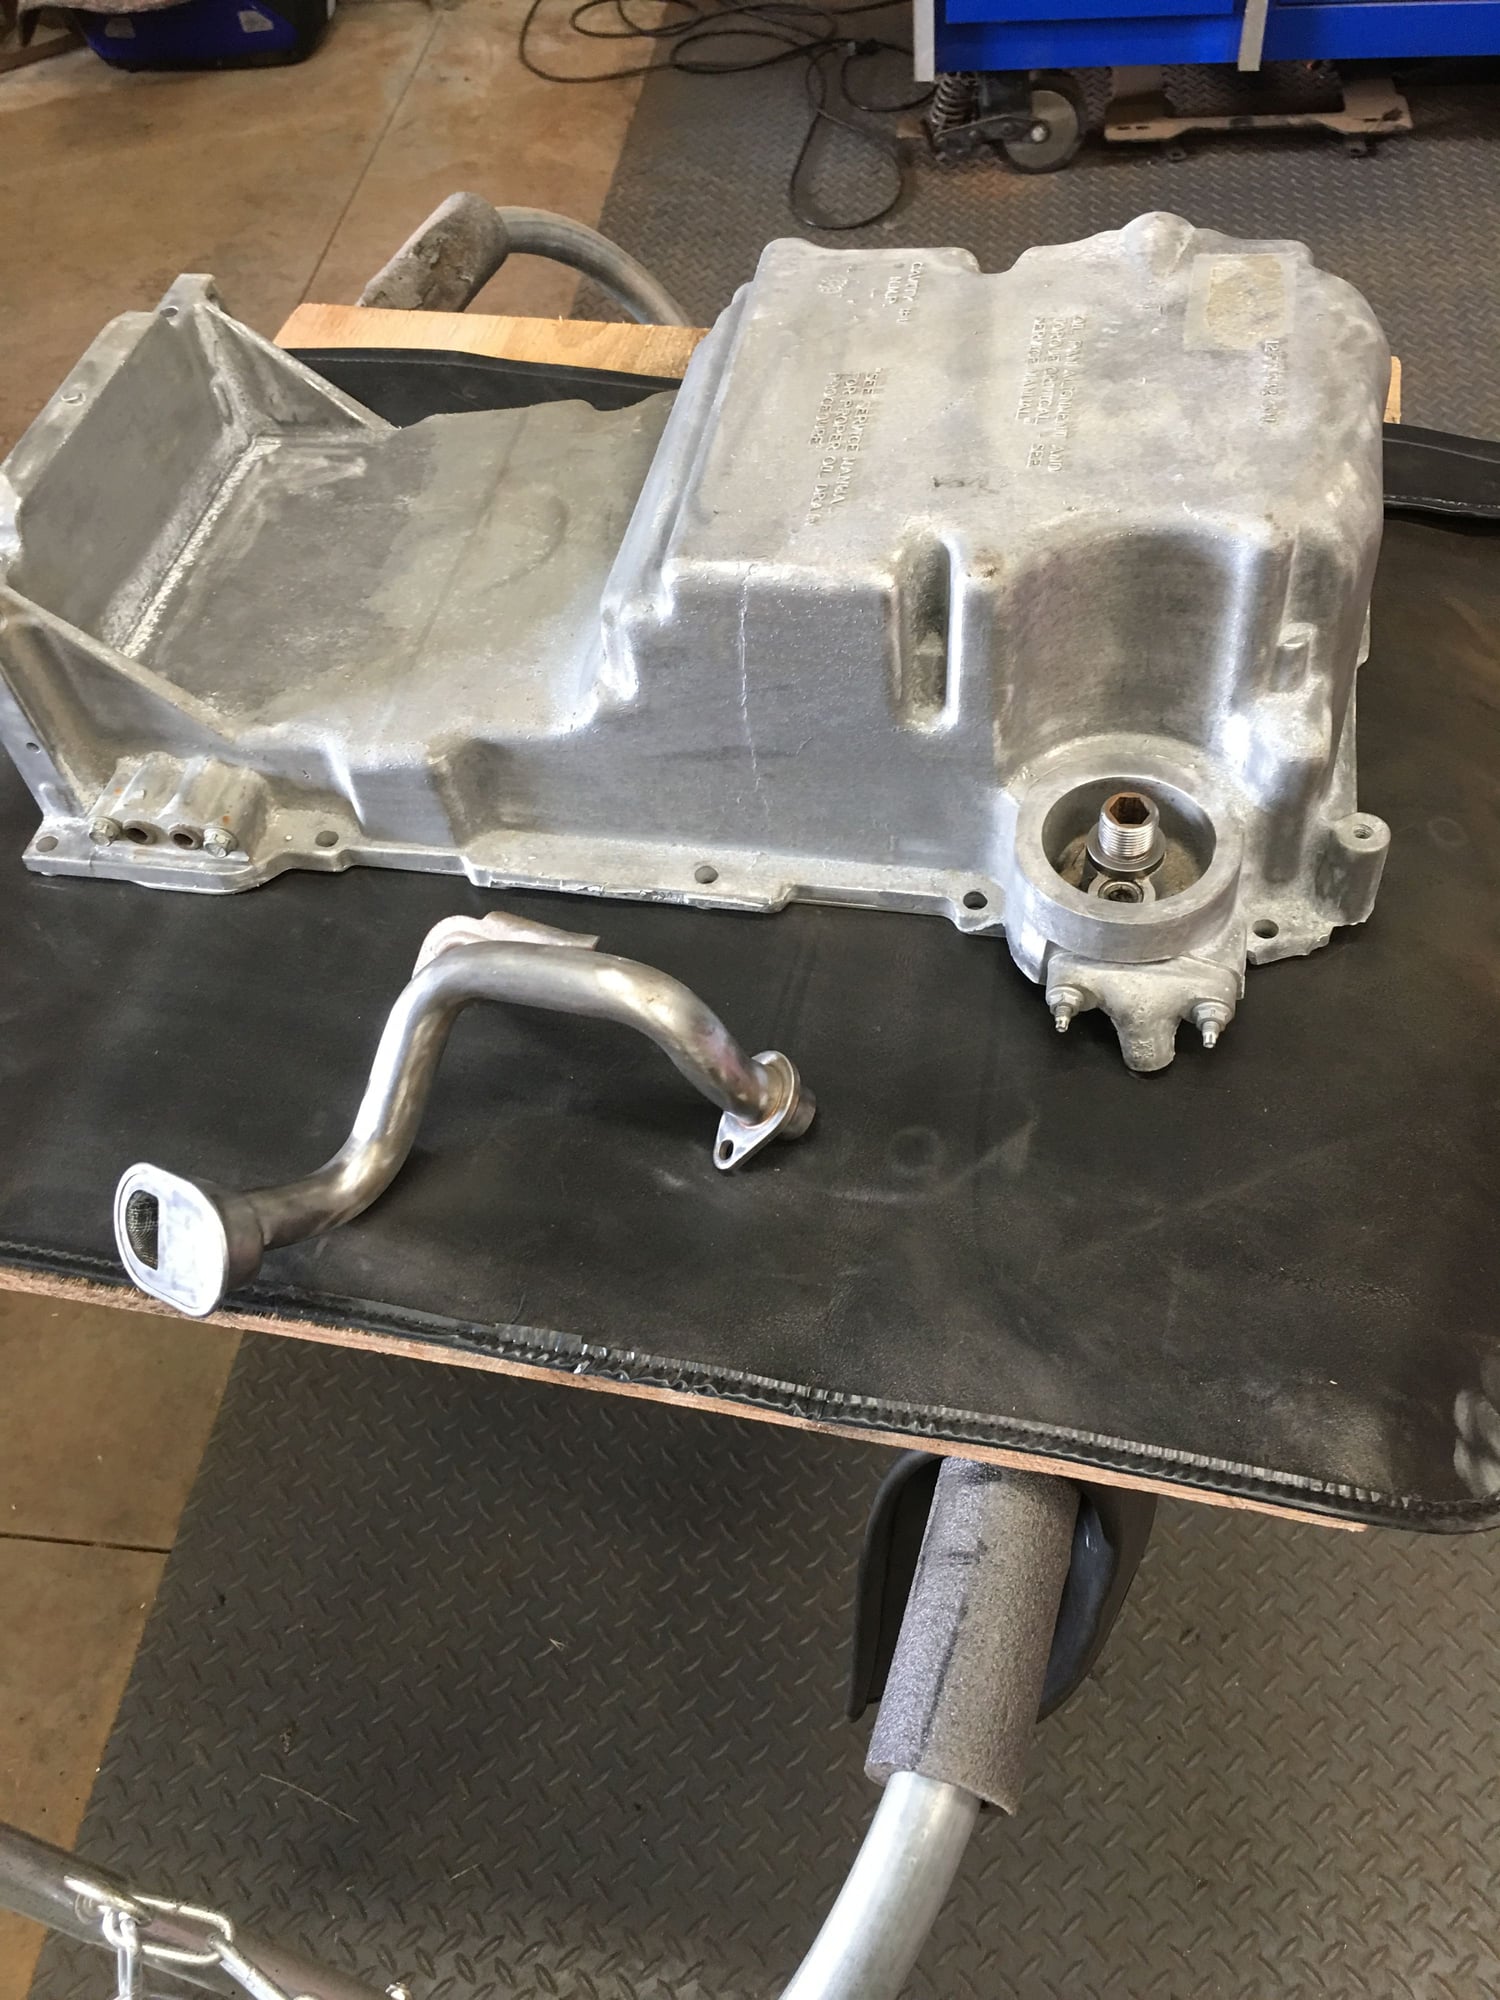  - GTO oil pan and pick up $220 - Hidden Valley Lake, CA 95467, United States